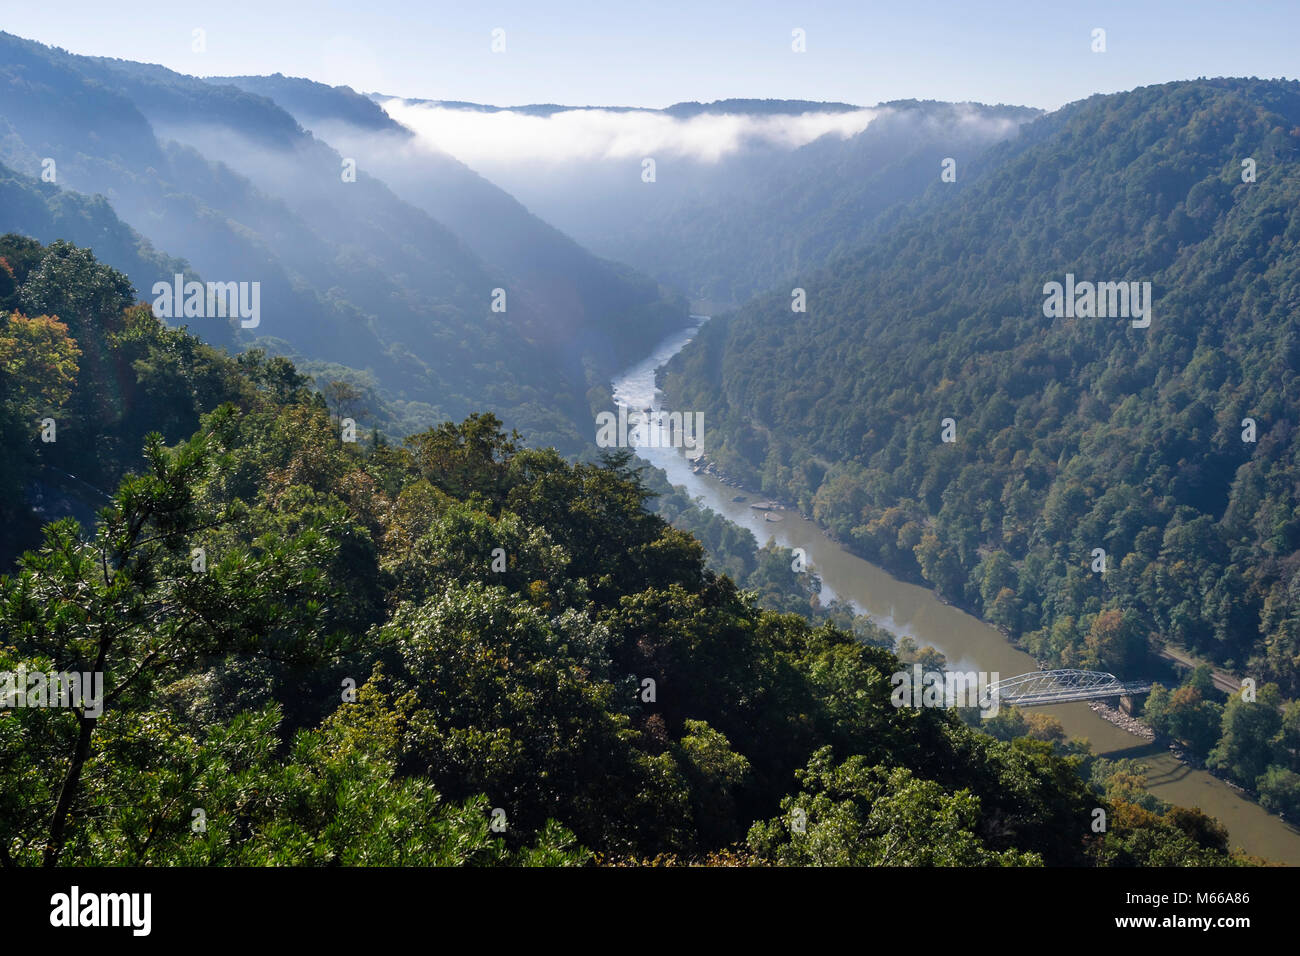 West Virginia, Appalachia Fayette County, Fayetteville, New River Gorge National River, Wasser, Nebenfluss, Appalachian Mountains, Morgennebel, Blick vom Canyon Stockfoto